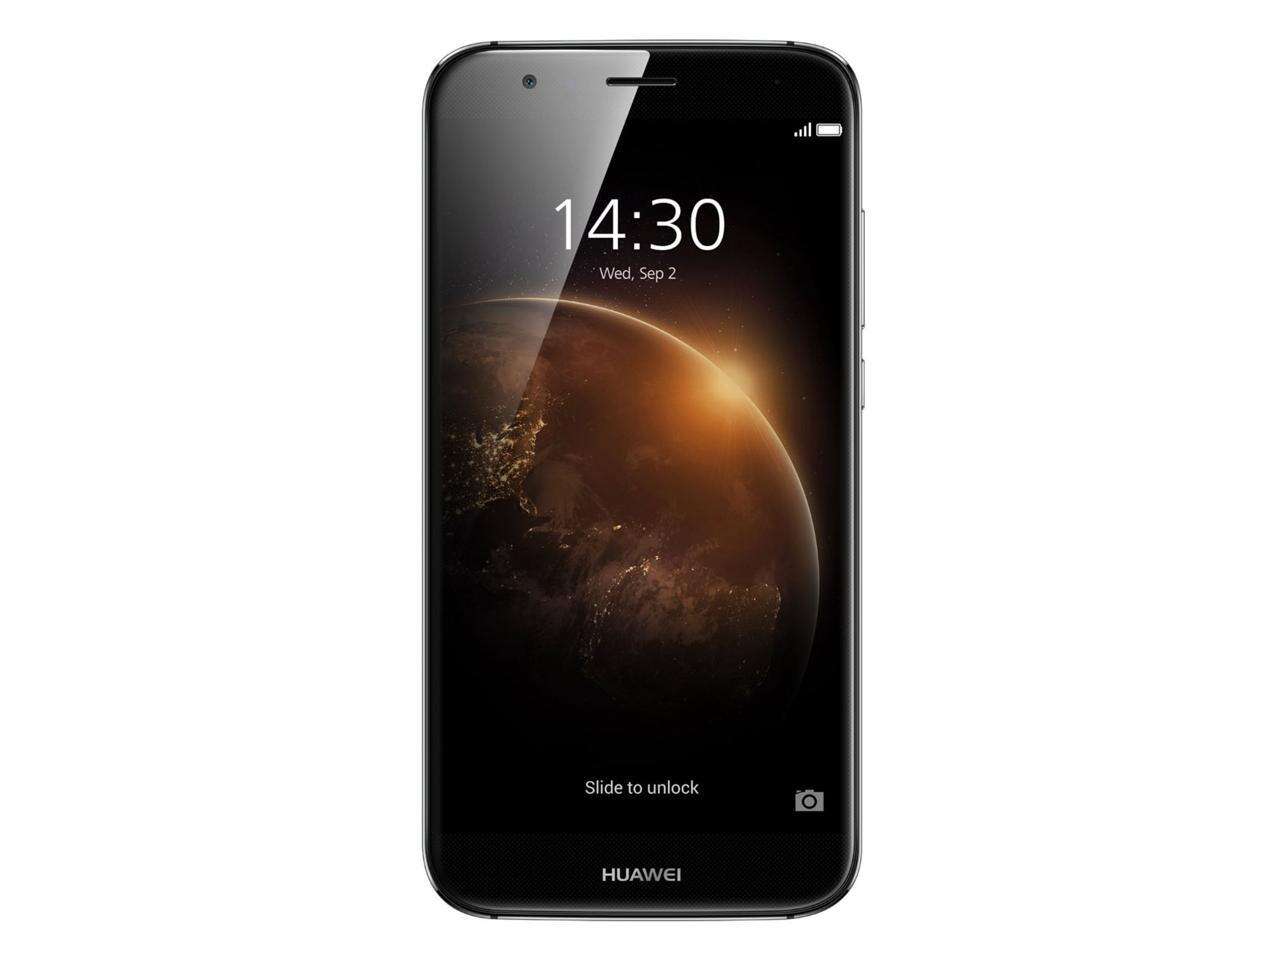 Huawei GX8 16GB Unlocked GSM 4G LTE Octa-Core Android Phone w/ 13 MP Camera - Space Grey